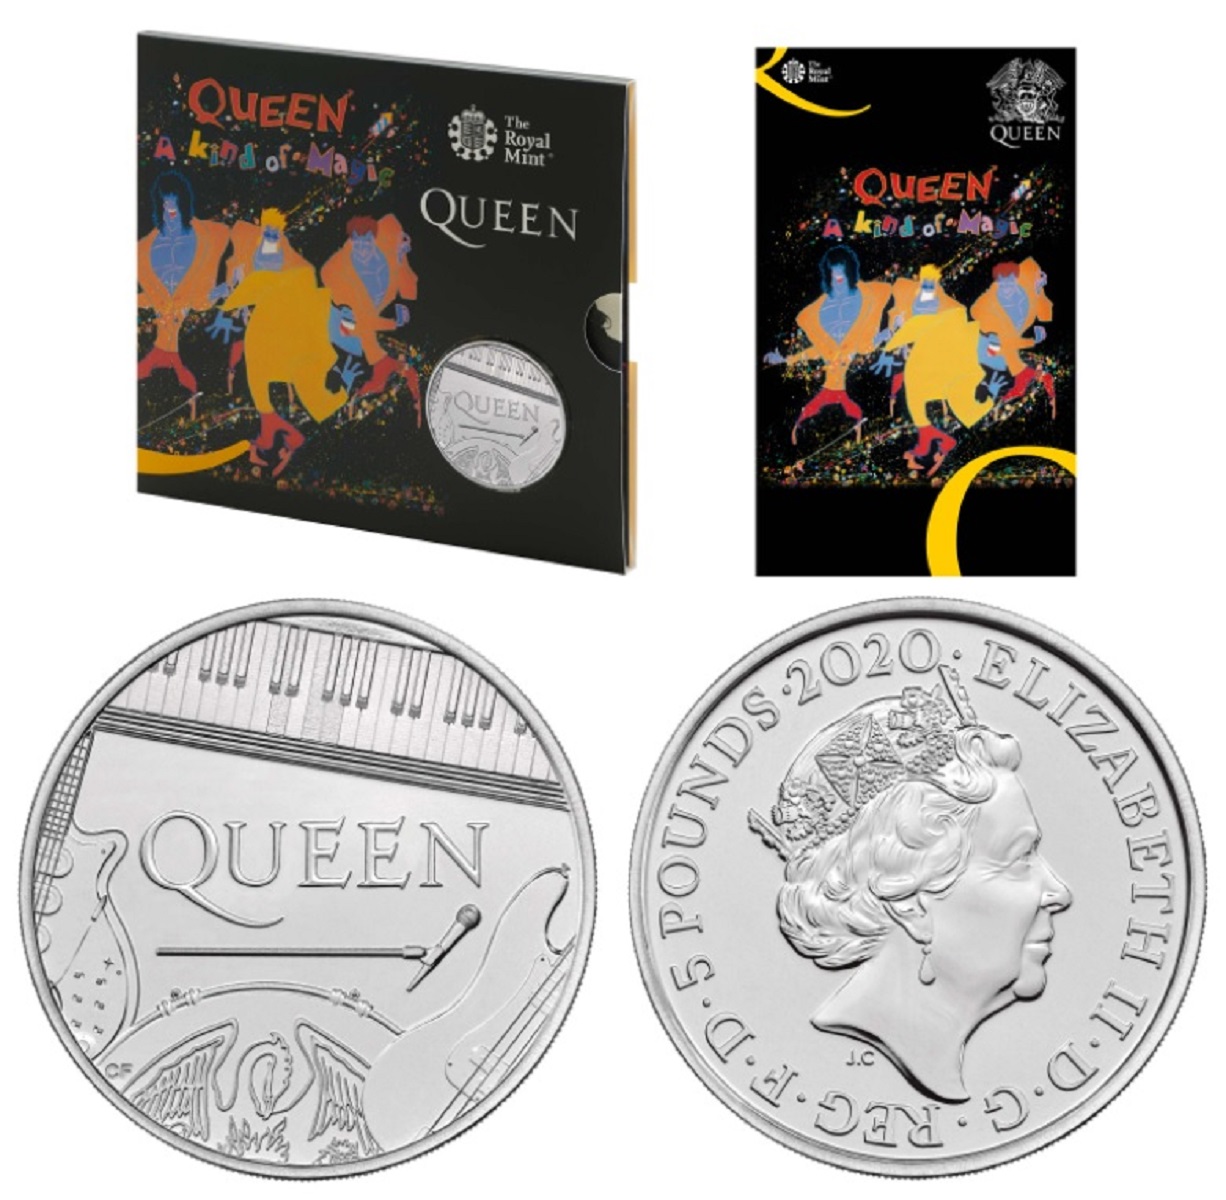 LIMITED EDITION Royal Mint 2020 Music Legends brilliant uncirculated UK £5 Queen coin "A Kind of